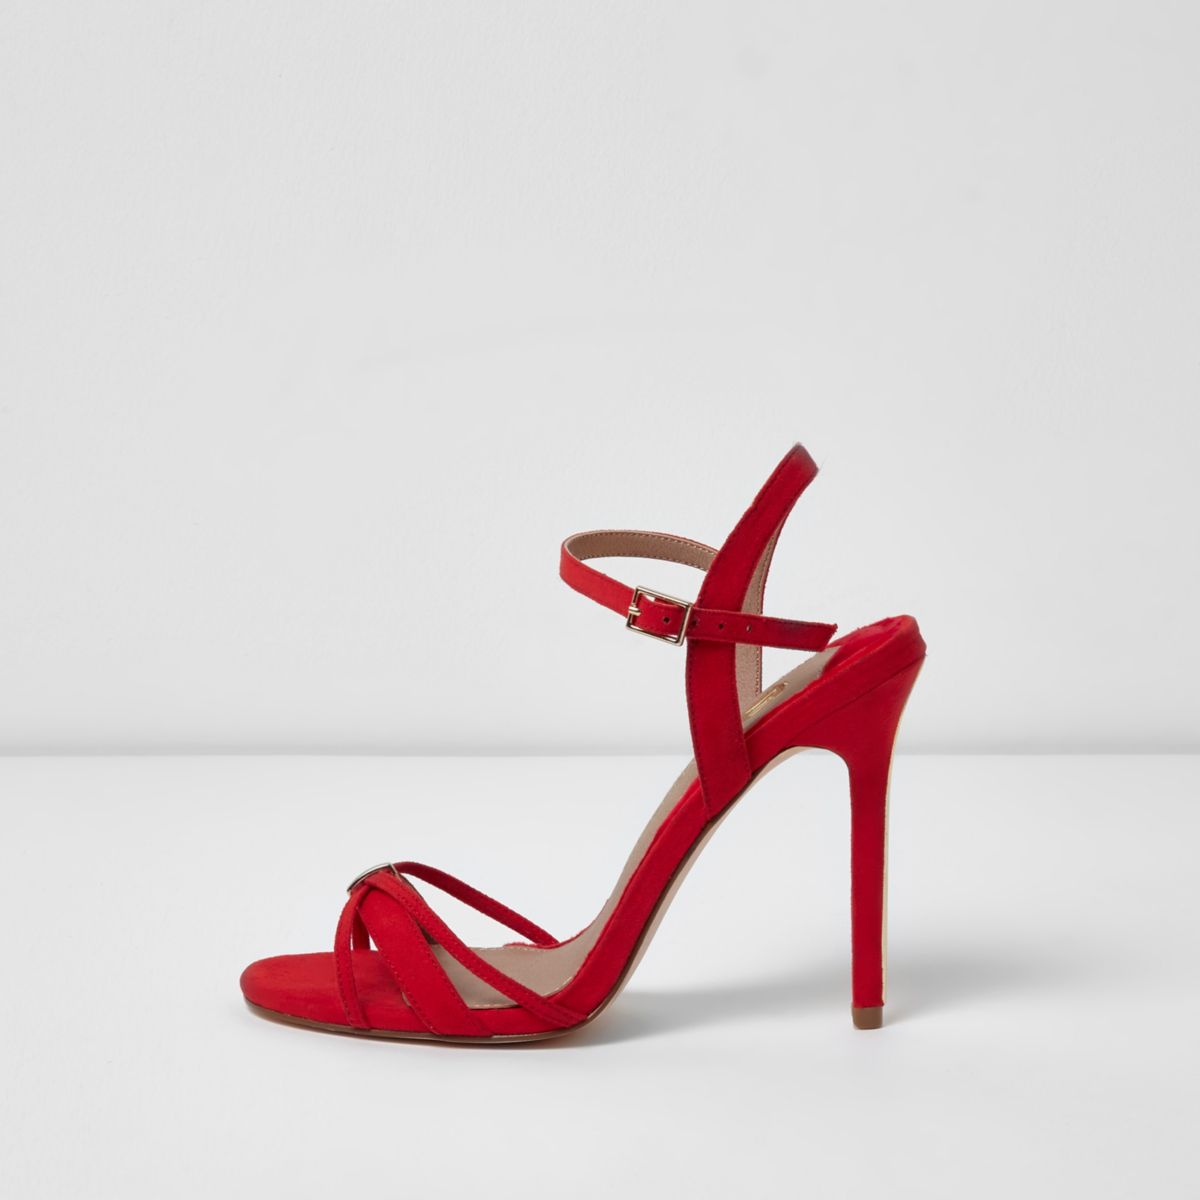 Red strappy barely there sandals - Shoes & Boots - Sale - women